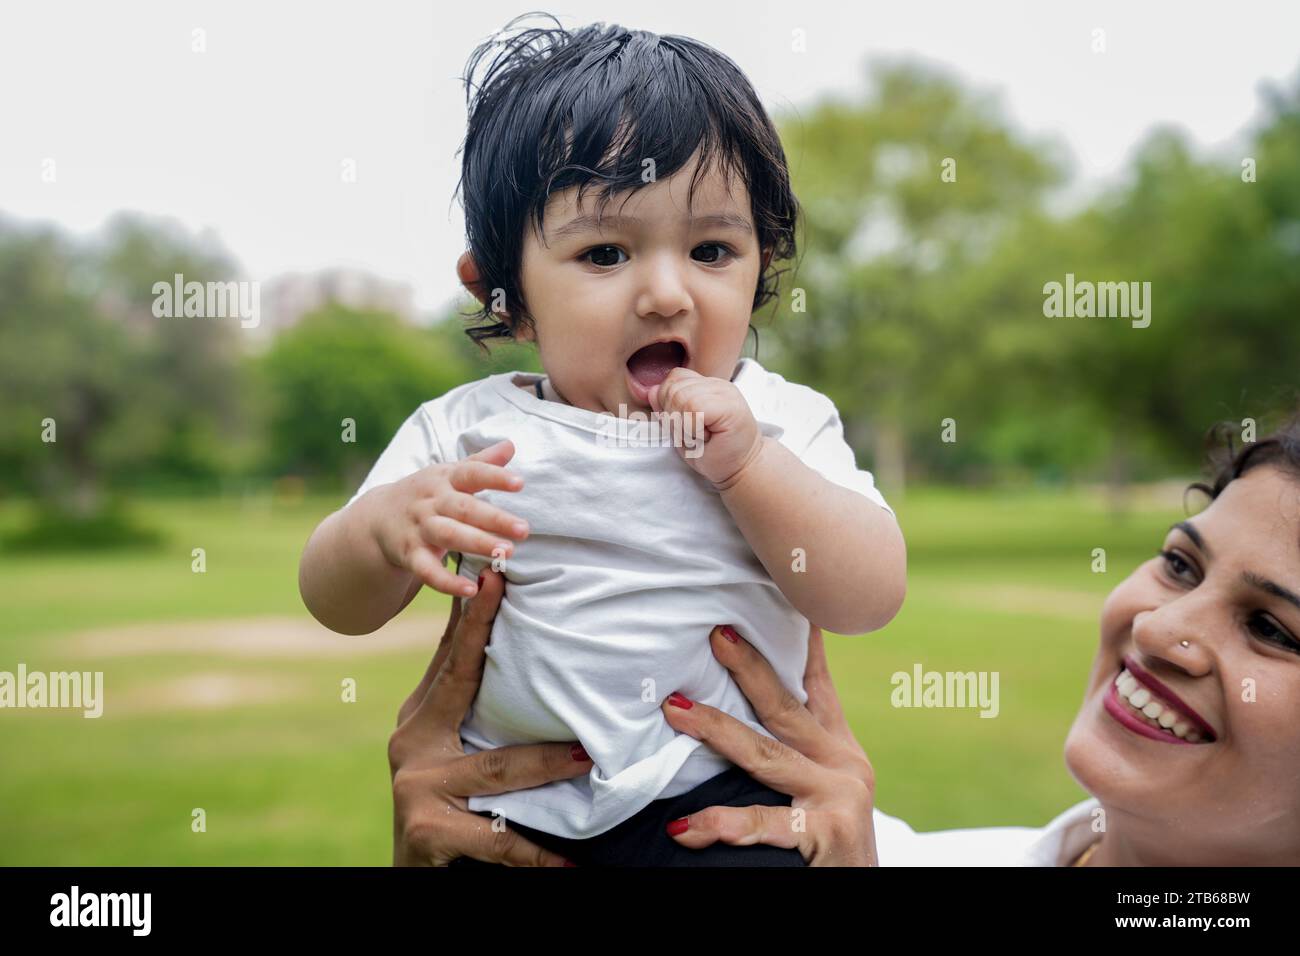 Portrait of happy cute indian kid or boy playing and having fun in outdoor park. Stock Photo